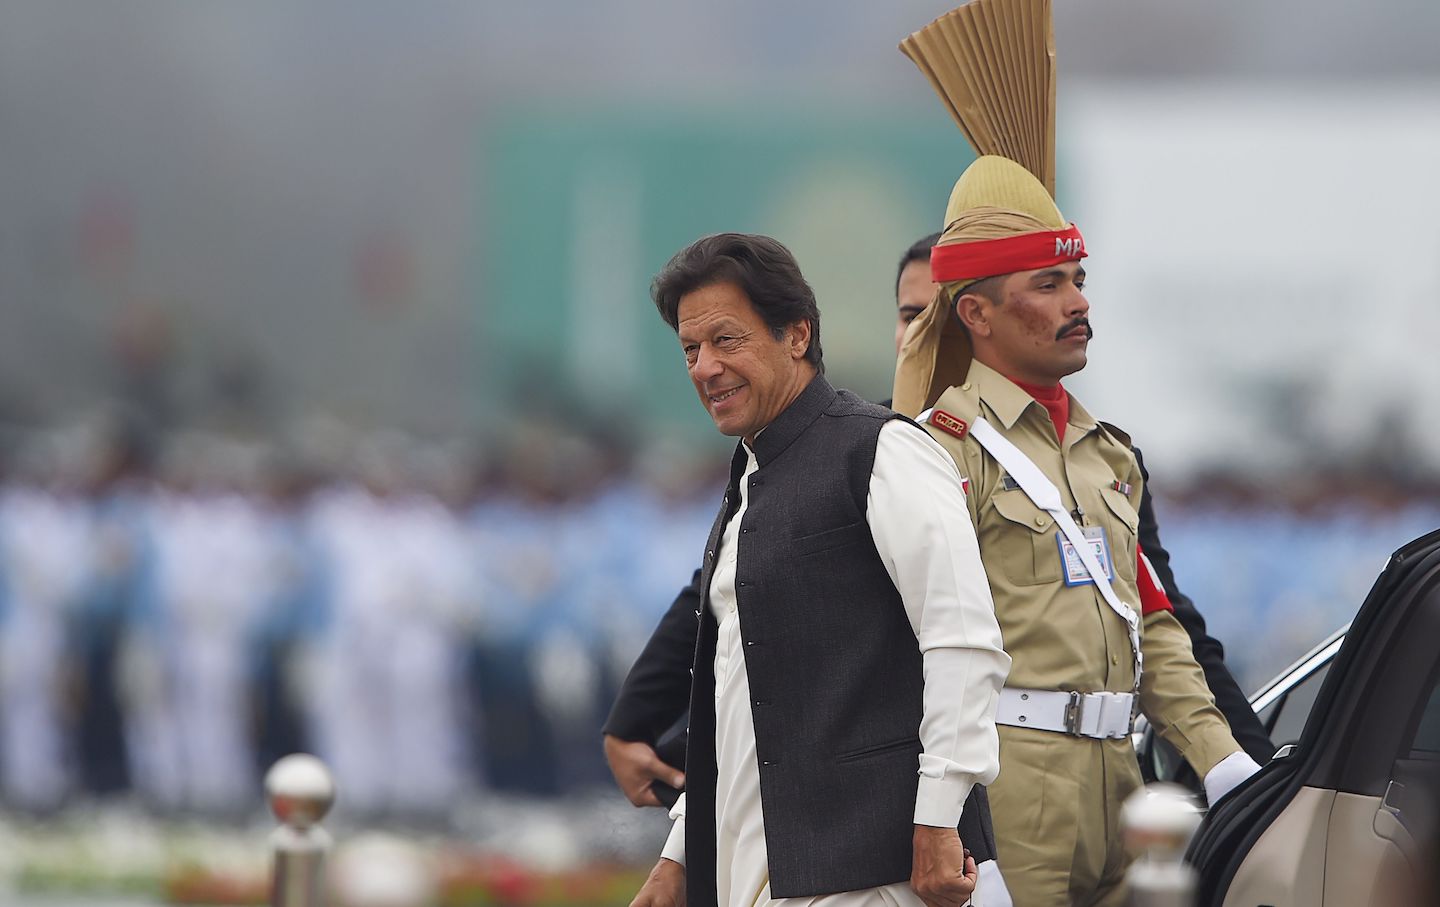 Imran Khan Faces a Standoff With the Pakistani Defense power